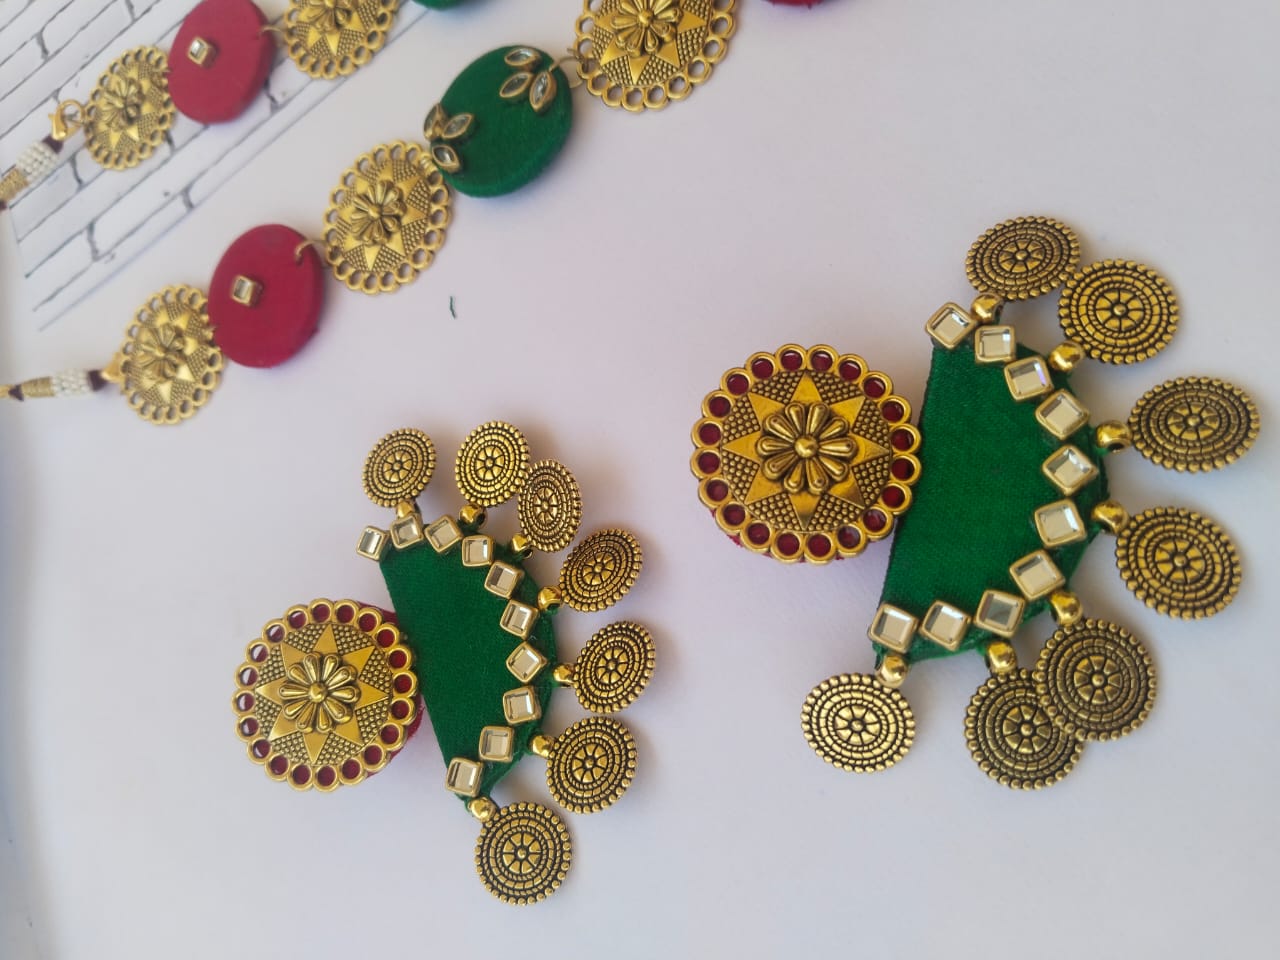 Green and golden kundan earrings with coins on white backdrop